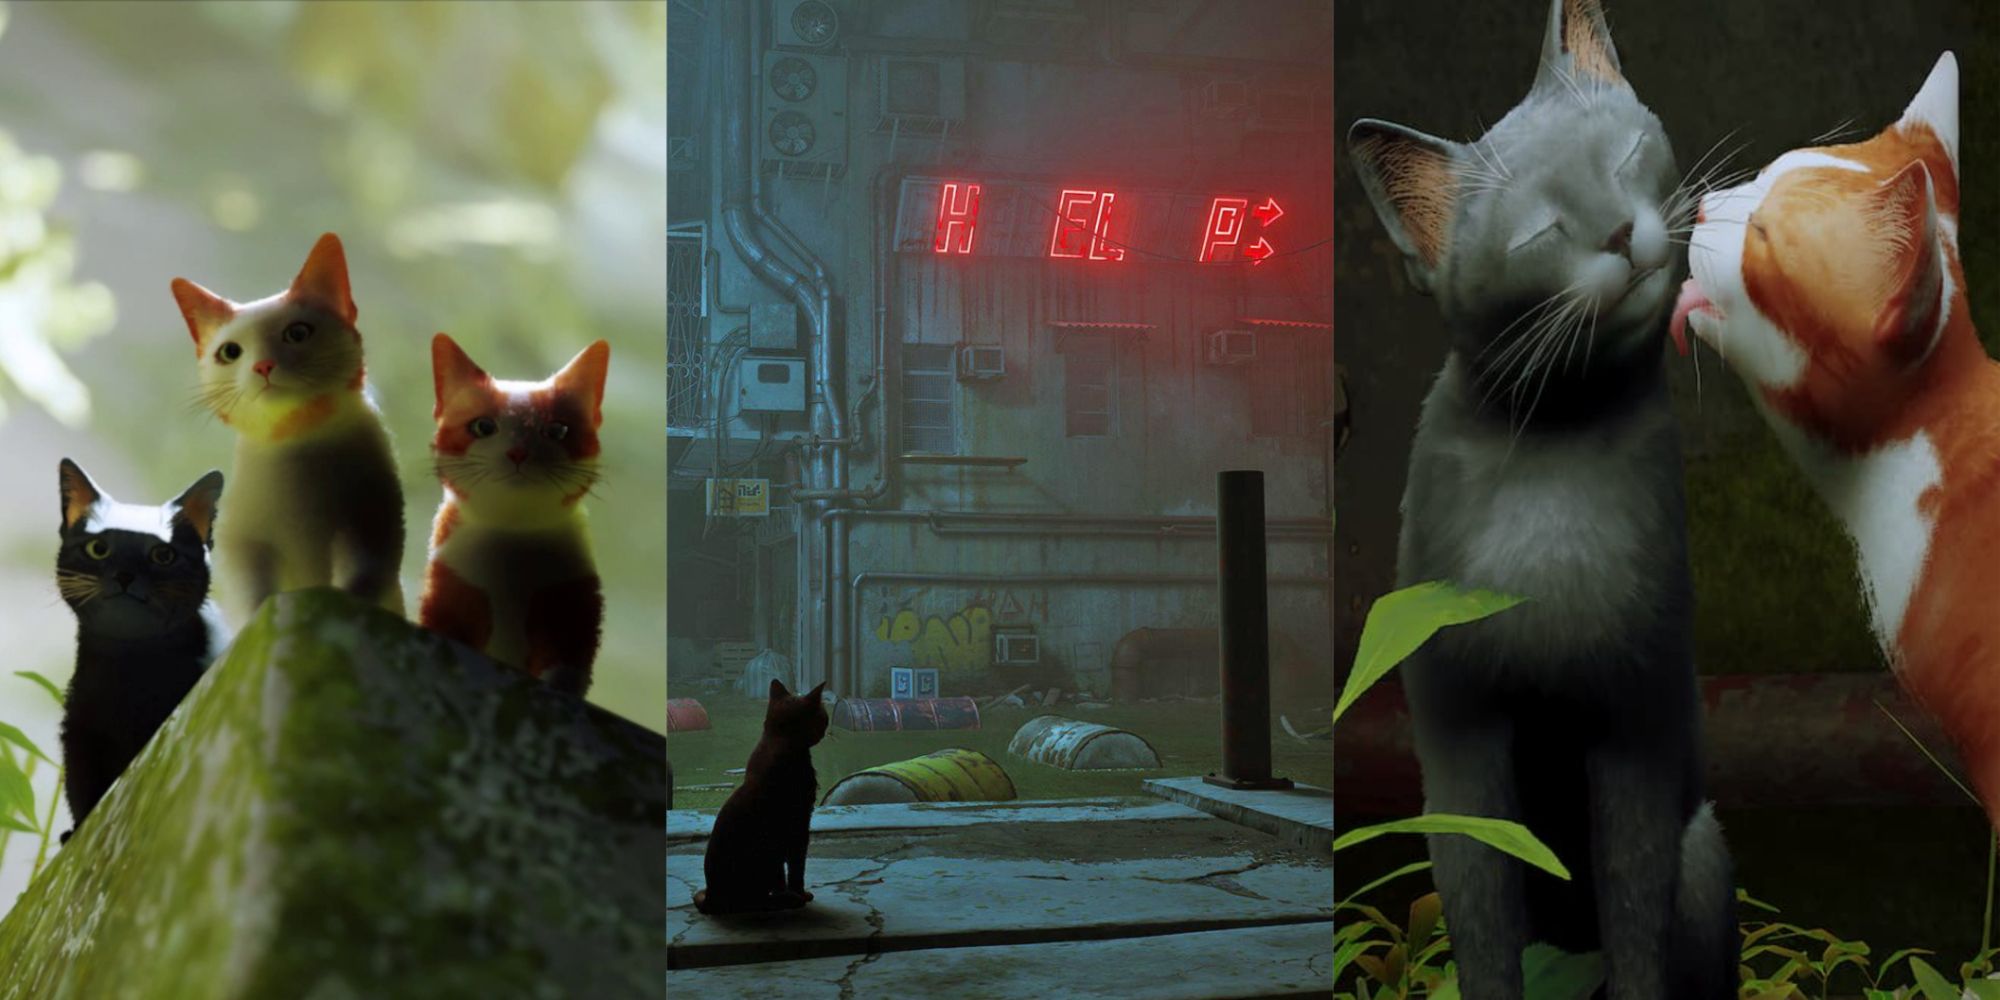 Stray: Best Cat Behaviors The Game Nailed Cover featuring the protagonist cat and its companions as well as a help sign